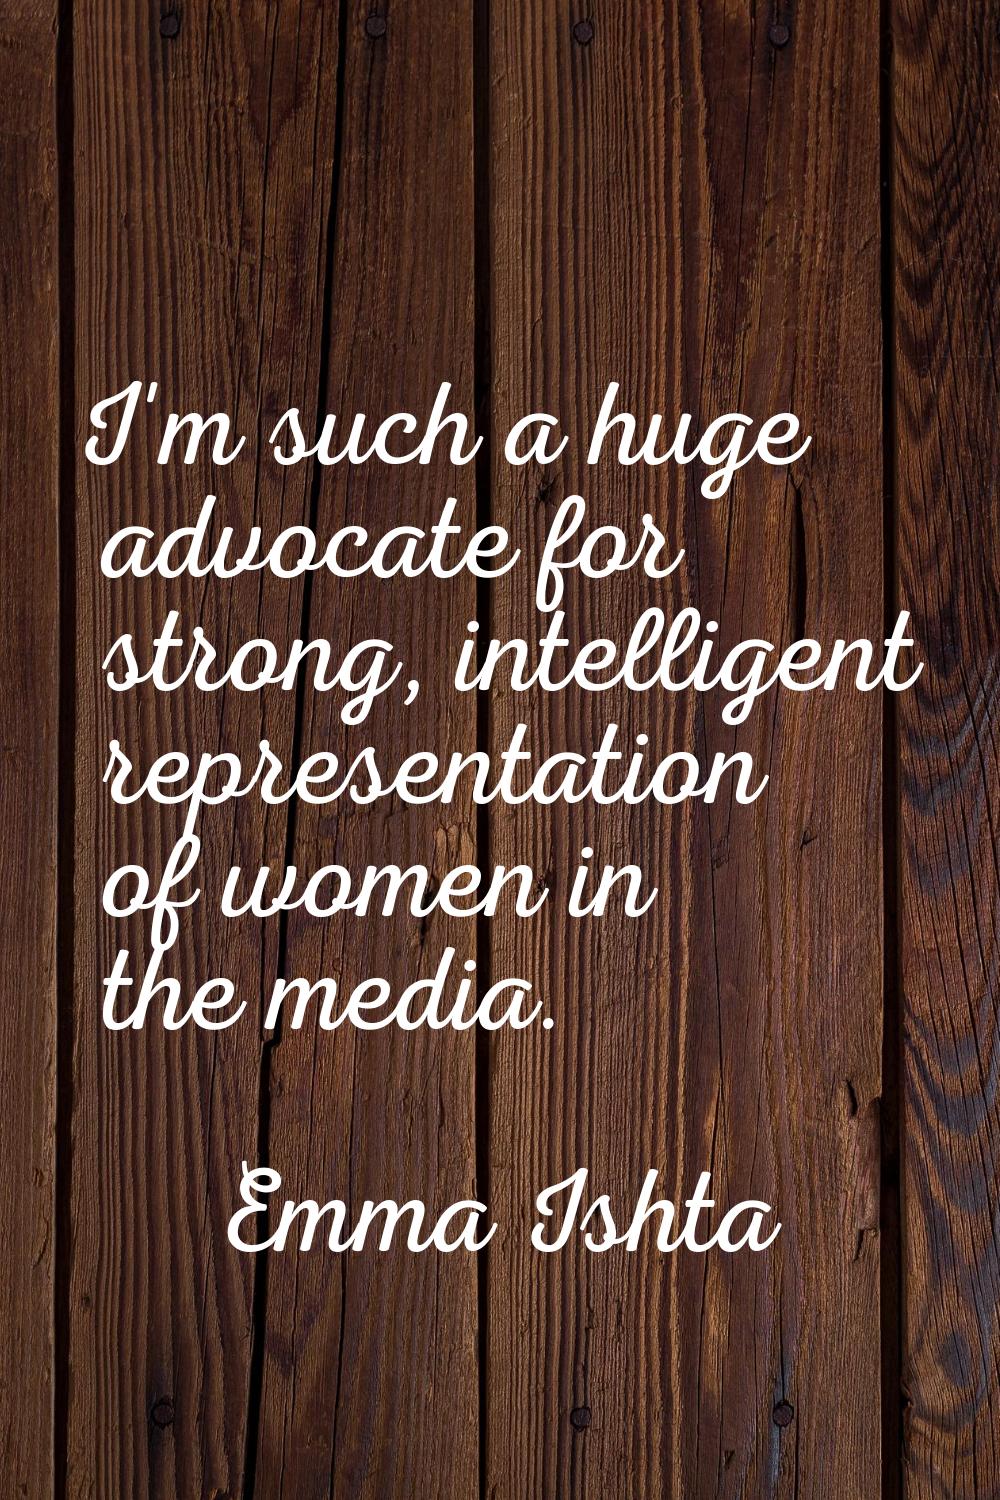 I'm such a huge advocate for strong, intelligent representation of women in the media.